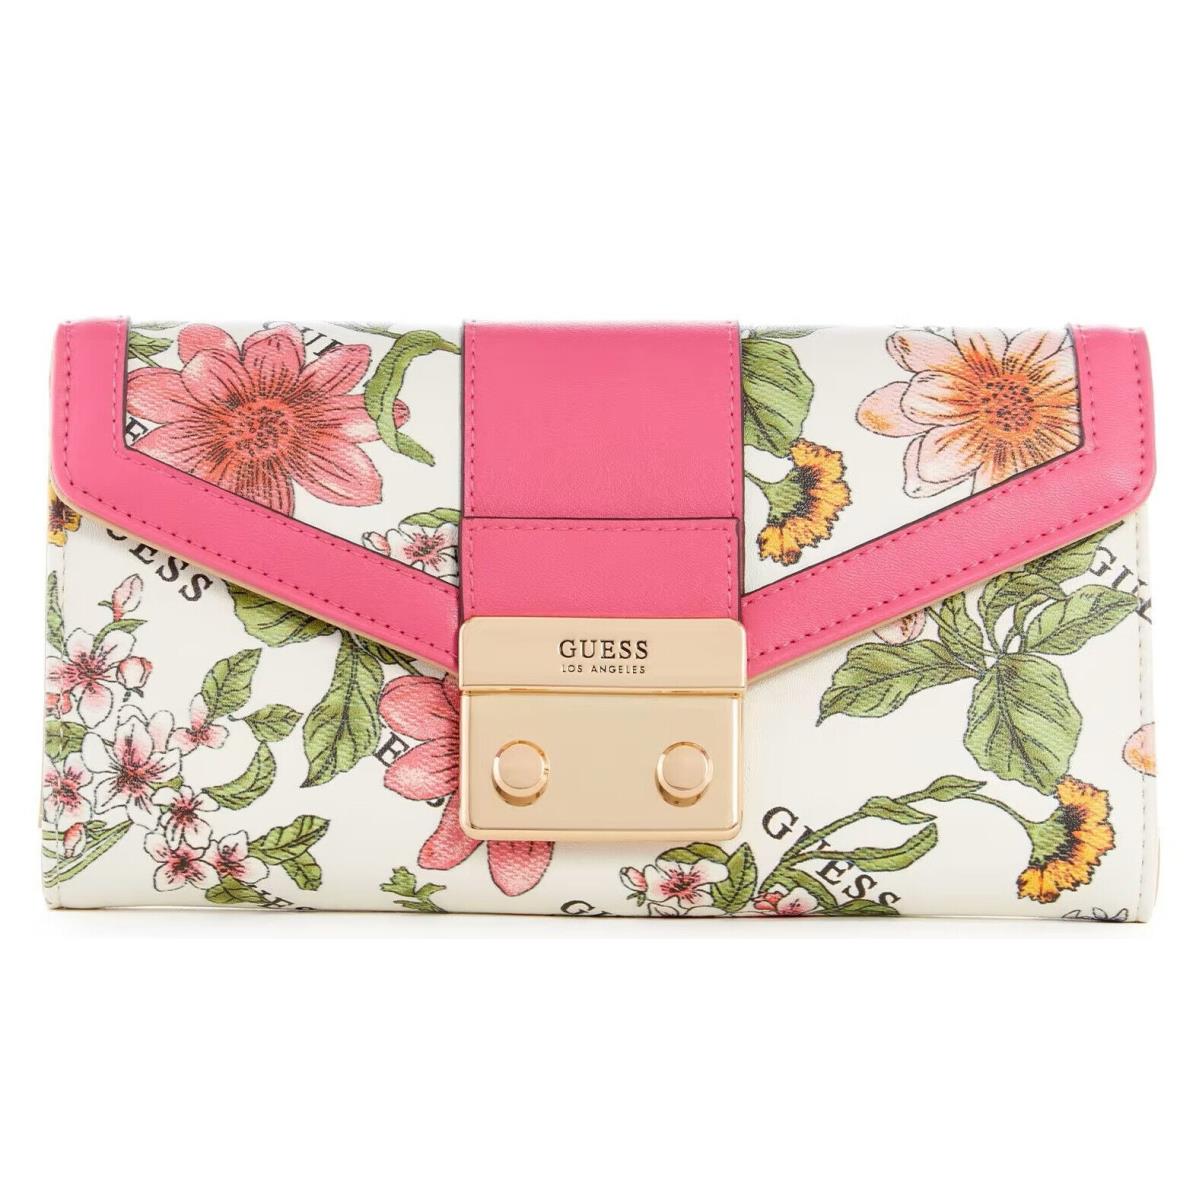 Guess Women`s White Pink Floral Print Trifold Large Wallet Clutch Bag